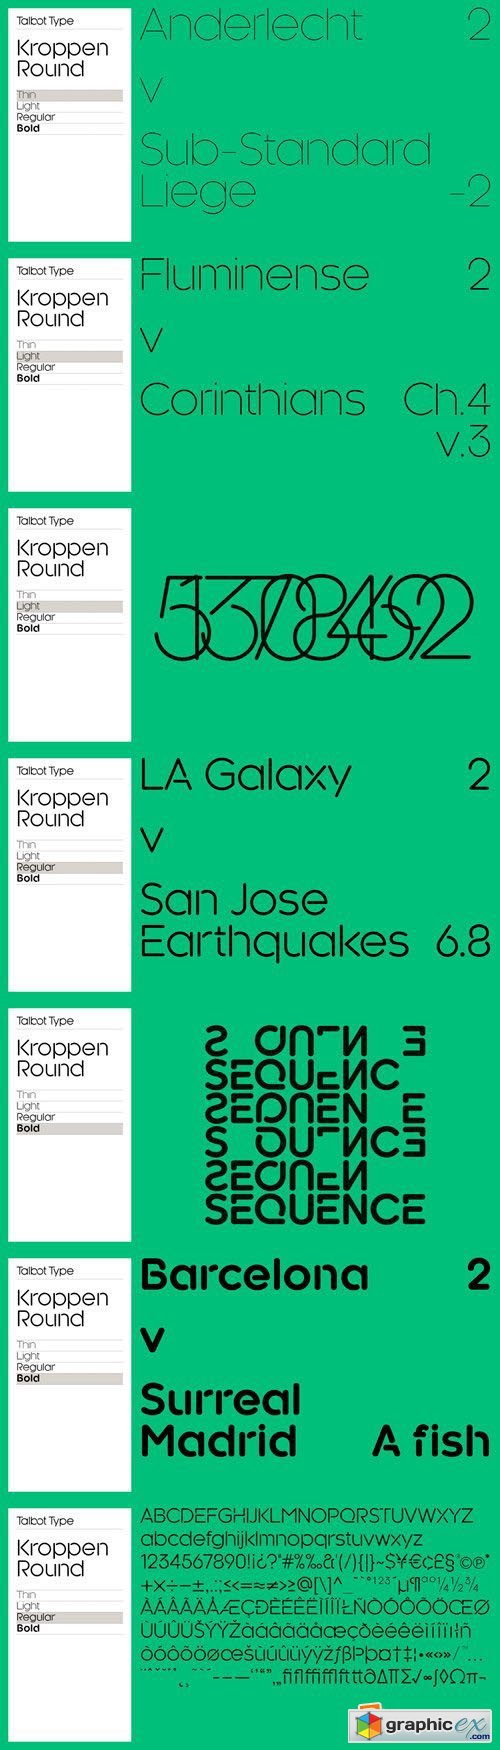 Kroppen Round Font Family - 8 Fonts